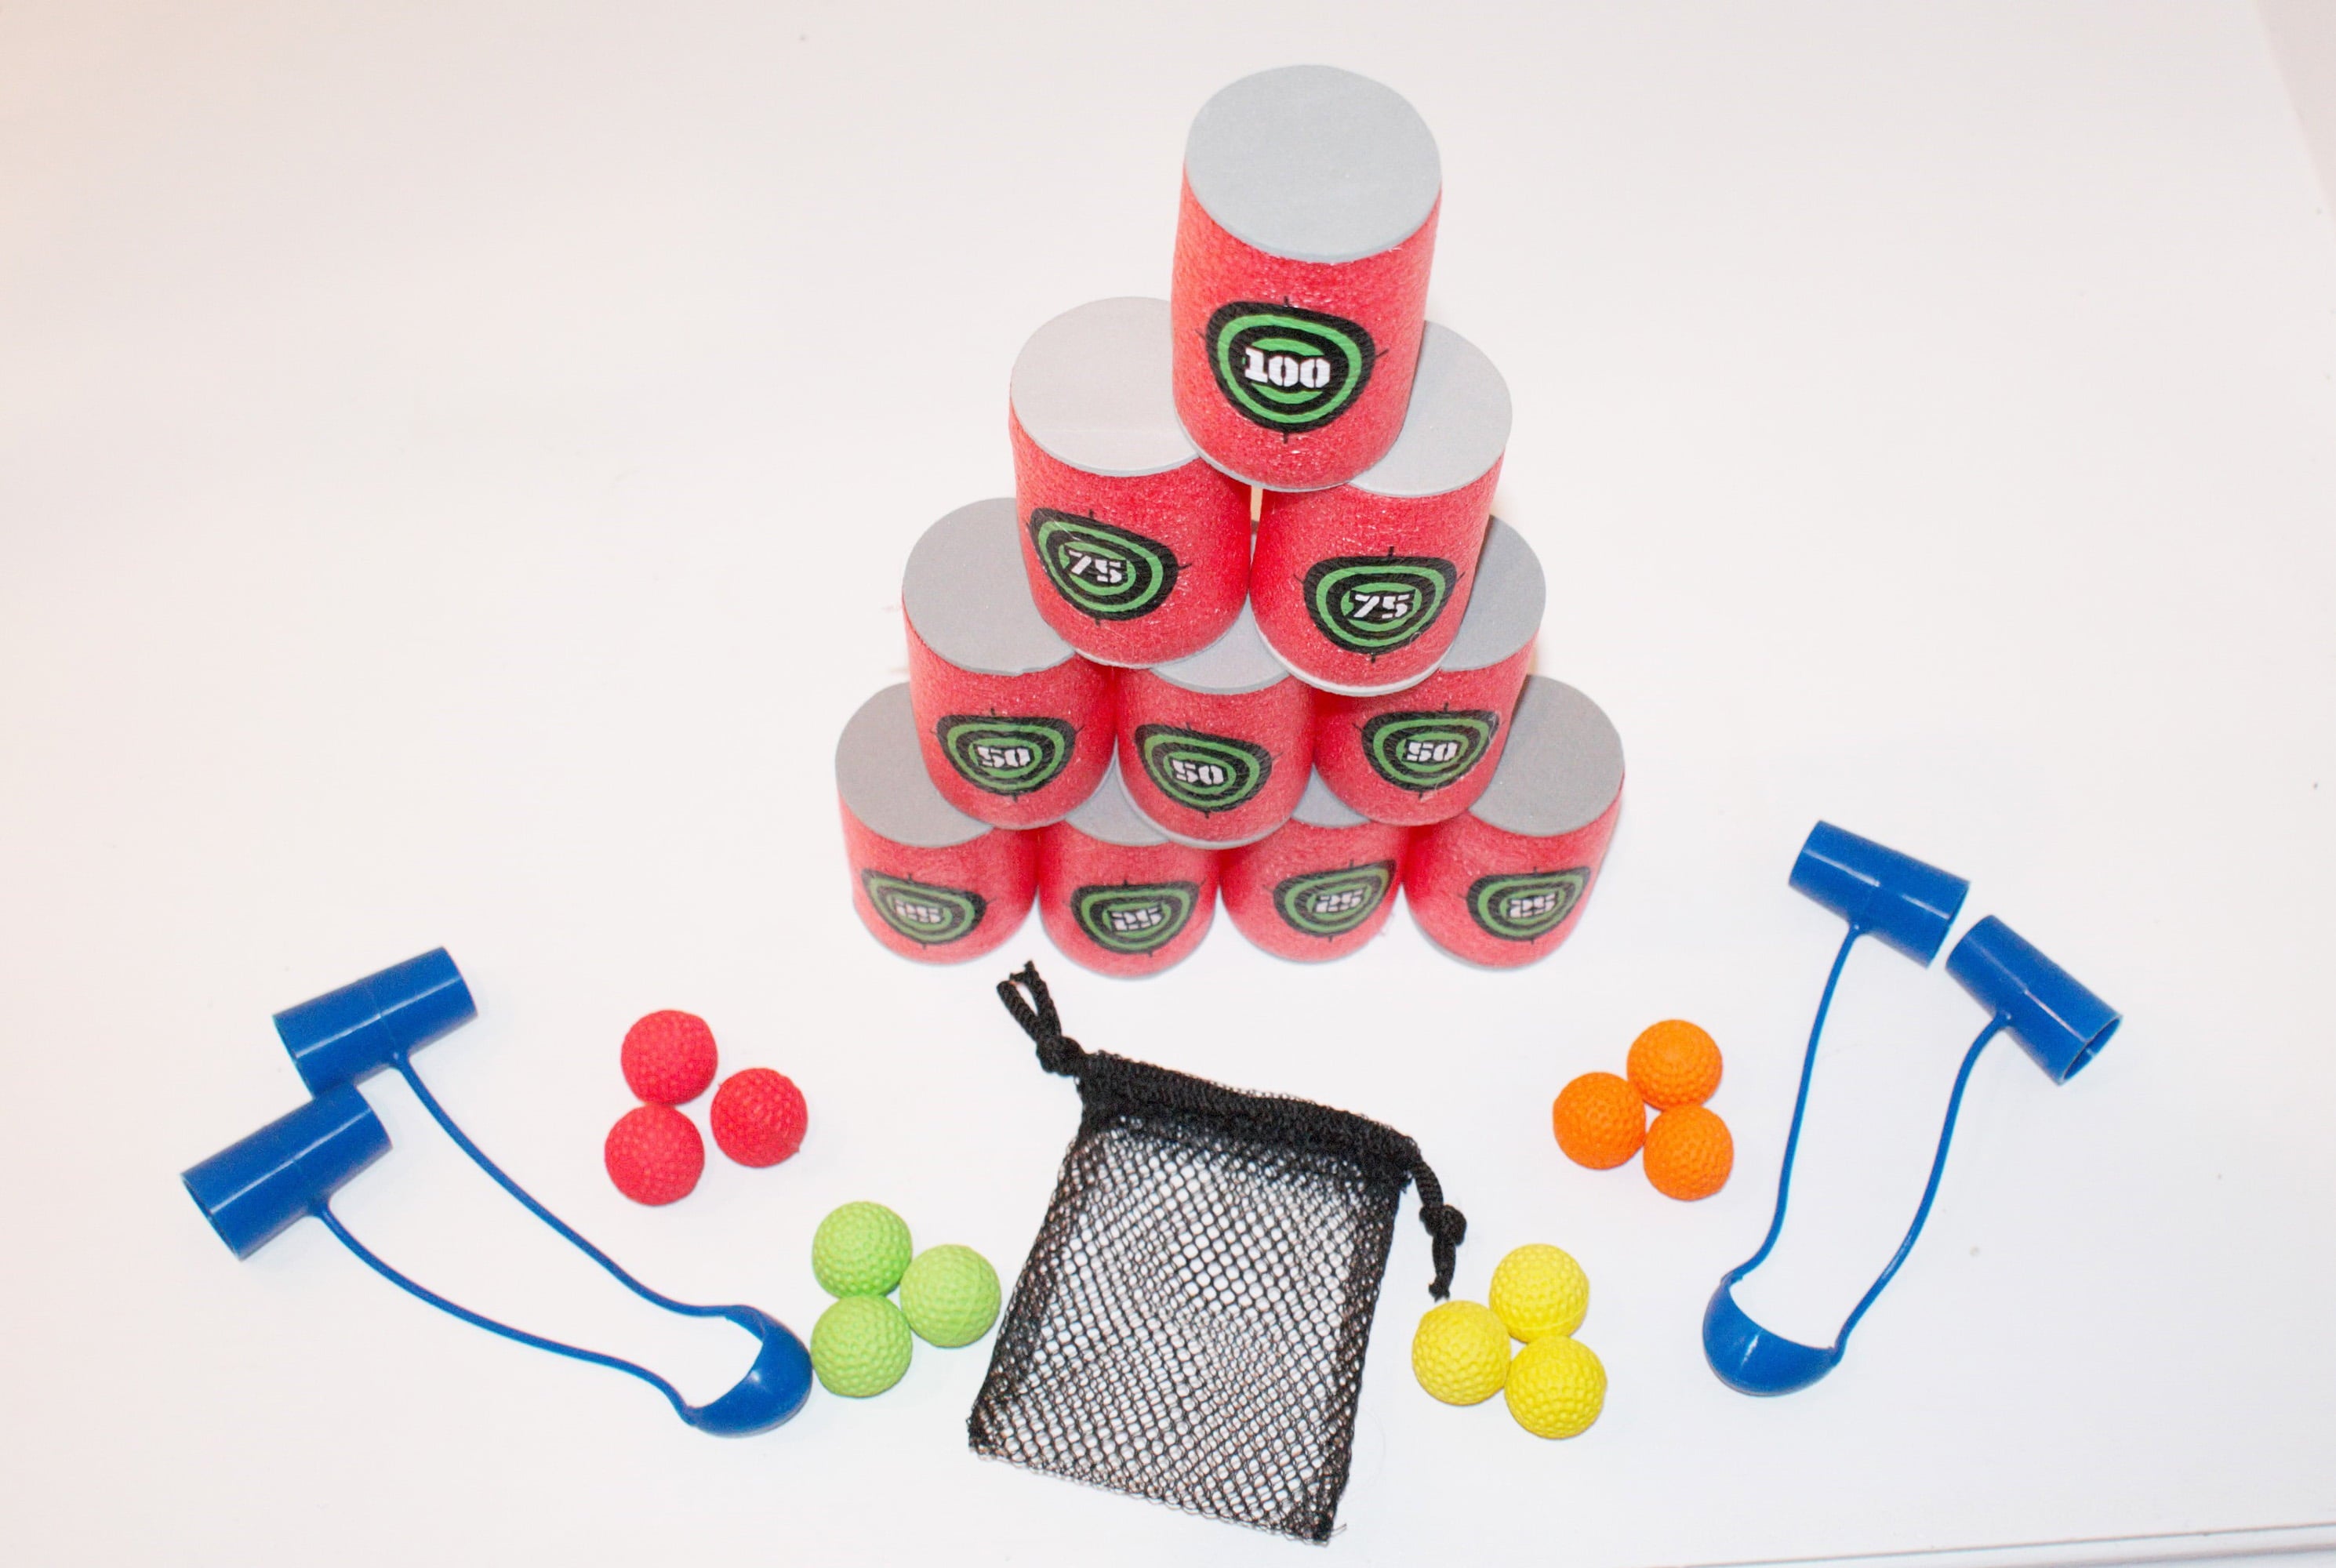 Creative Brainworks Finger Rocketz, Includes 2 Finger Creative Brainworks Sling rocketz, 12 Foam Balls, 10 Foam cans for Targets, 1 Carry Pouch